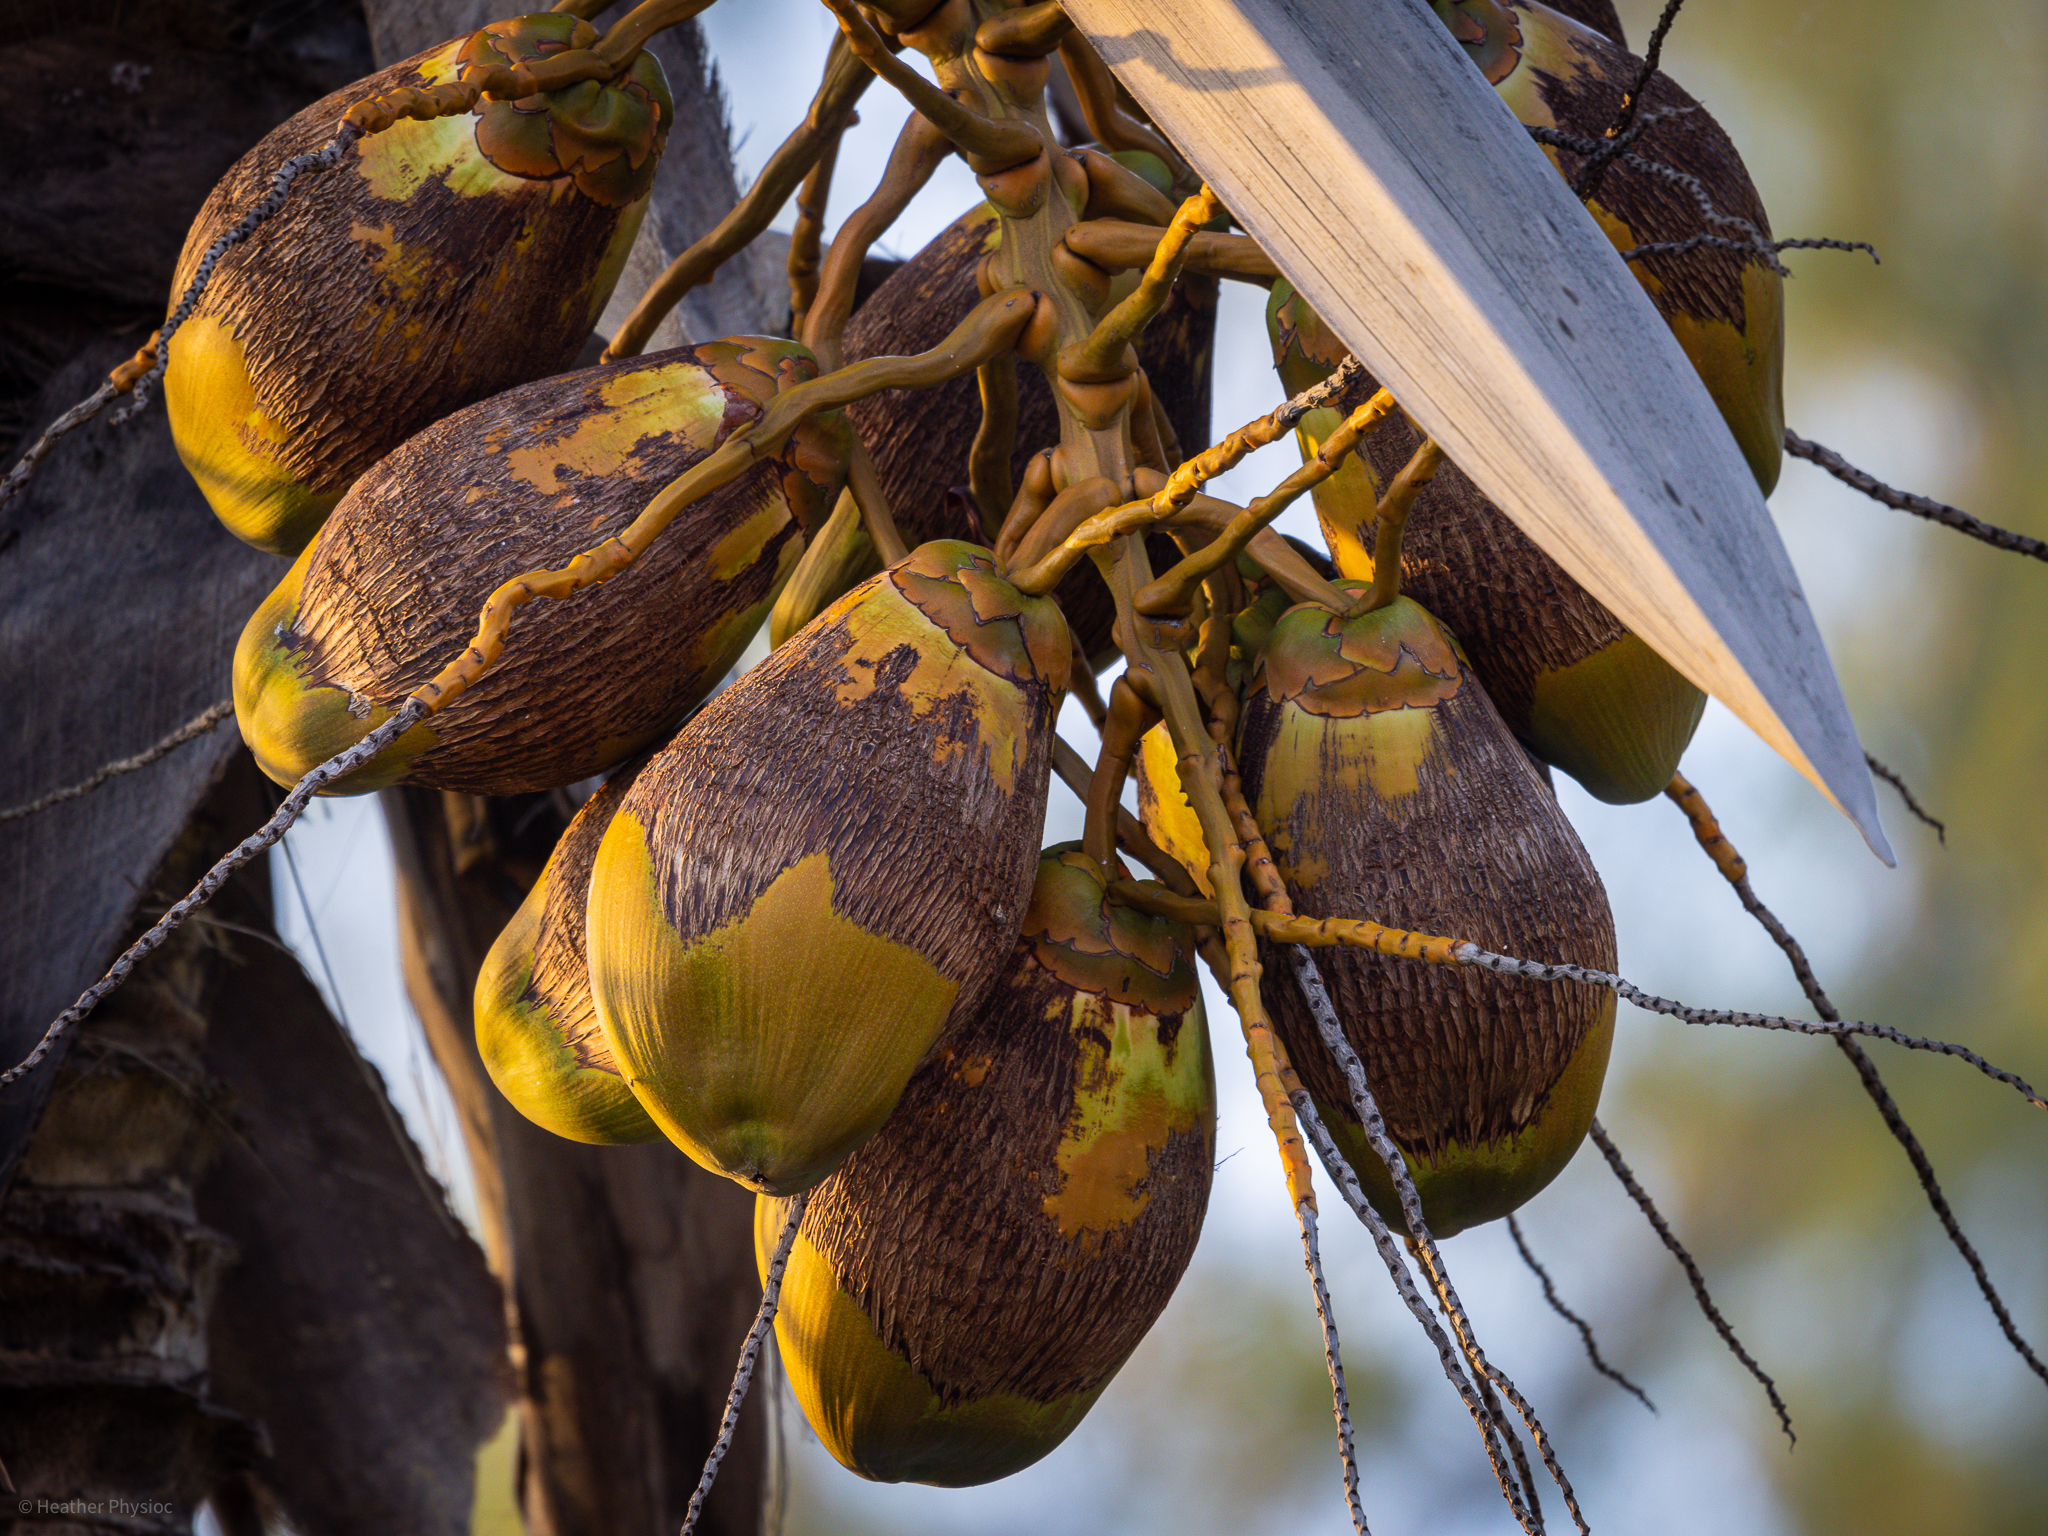 Coconut Clusters on Palms in Cattlewash, St. Joseph Parish, Barbados - photo by Heather Physioc